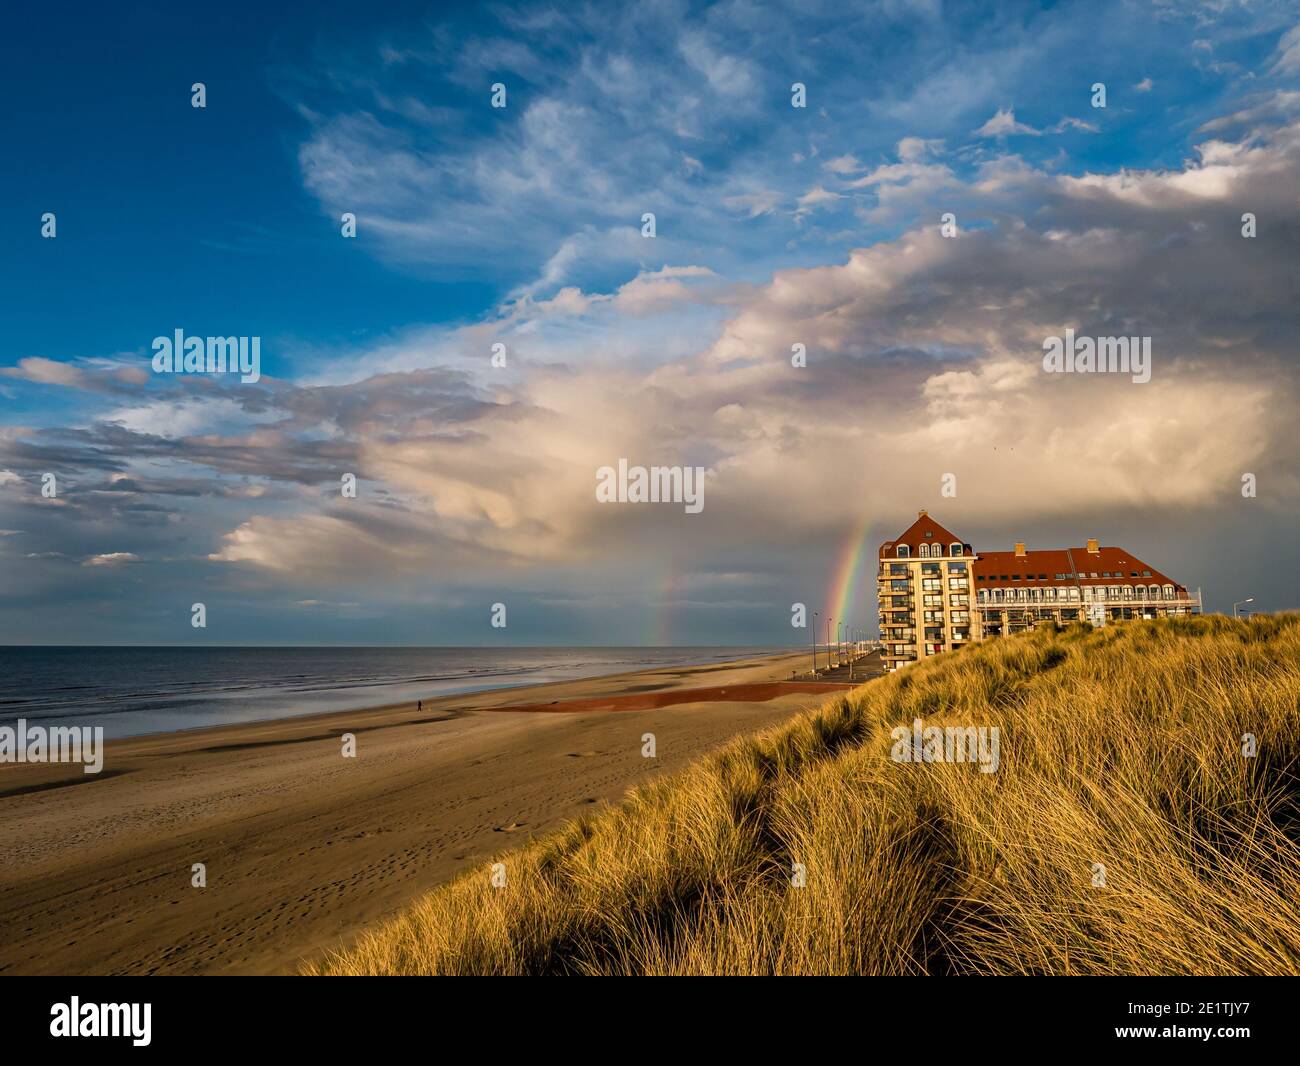 Rainbow in colorful scenery at the beach Stock Photo